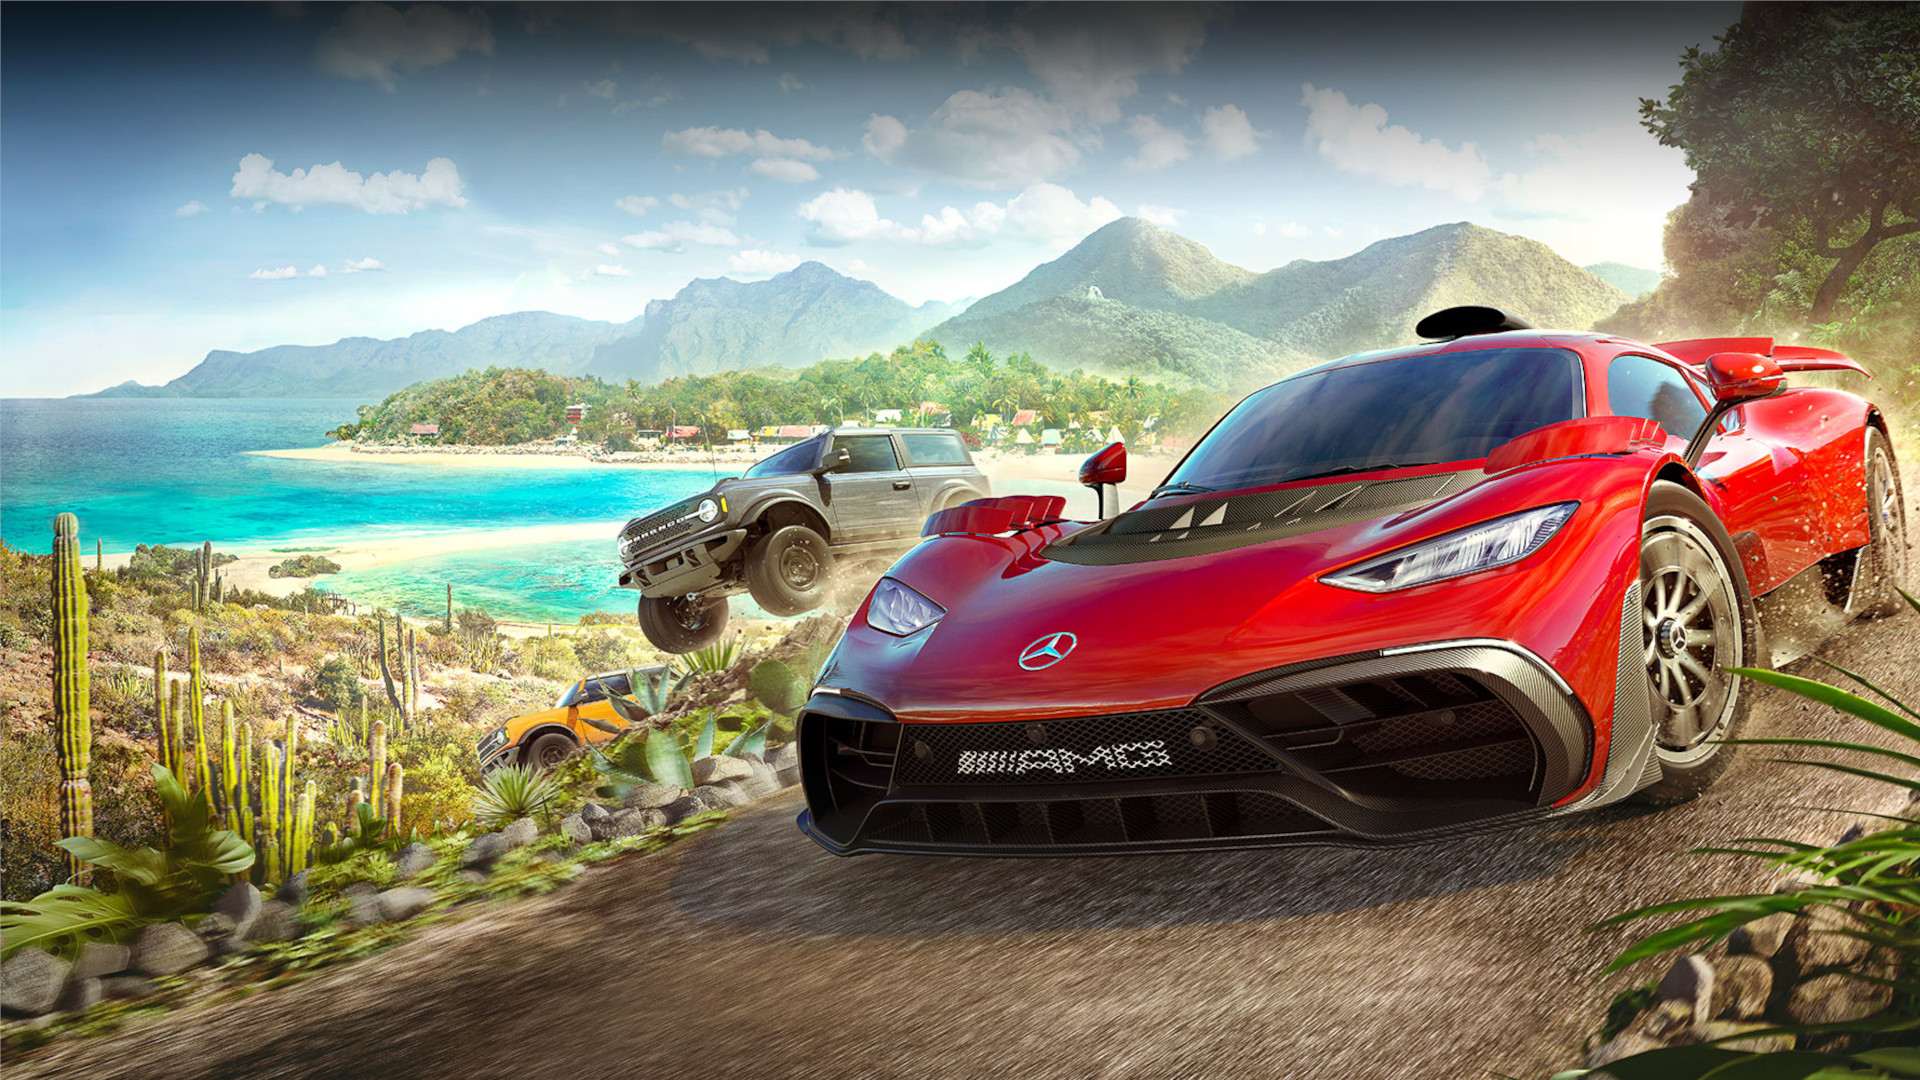 Forza Horizon 5 on PC: System requirements, specs, ray tracing, and more